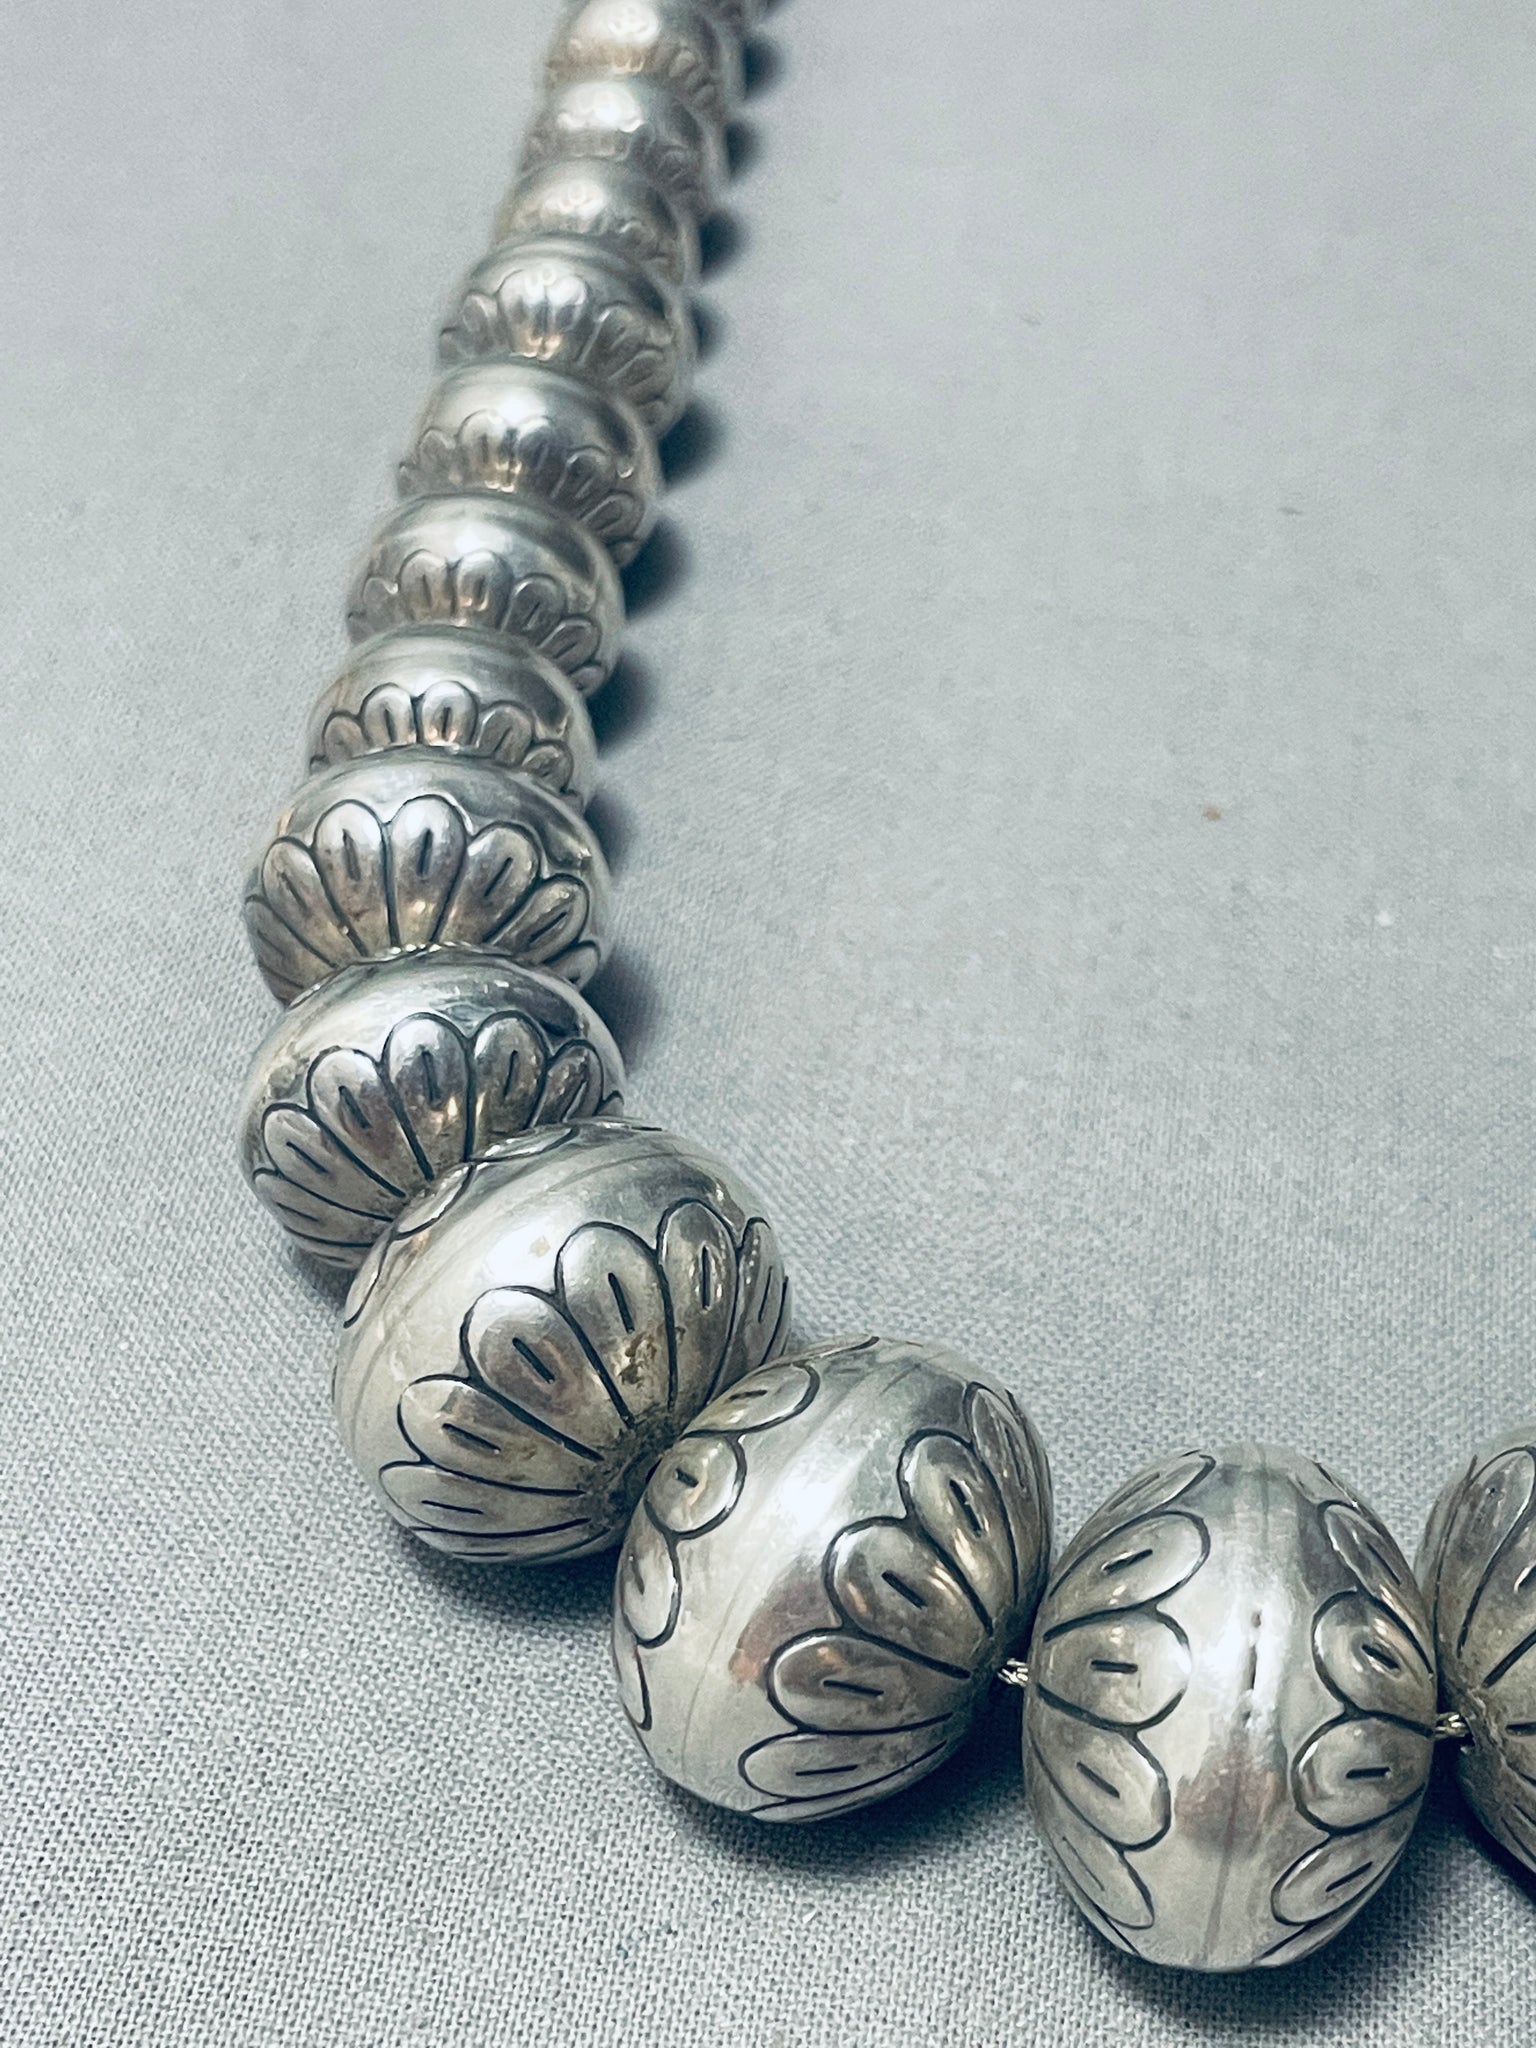 Silver Graduated Bead Necklace